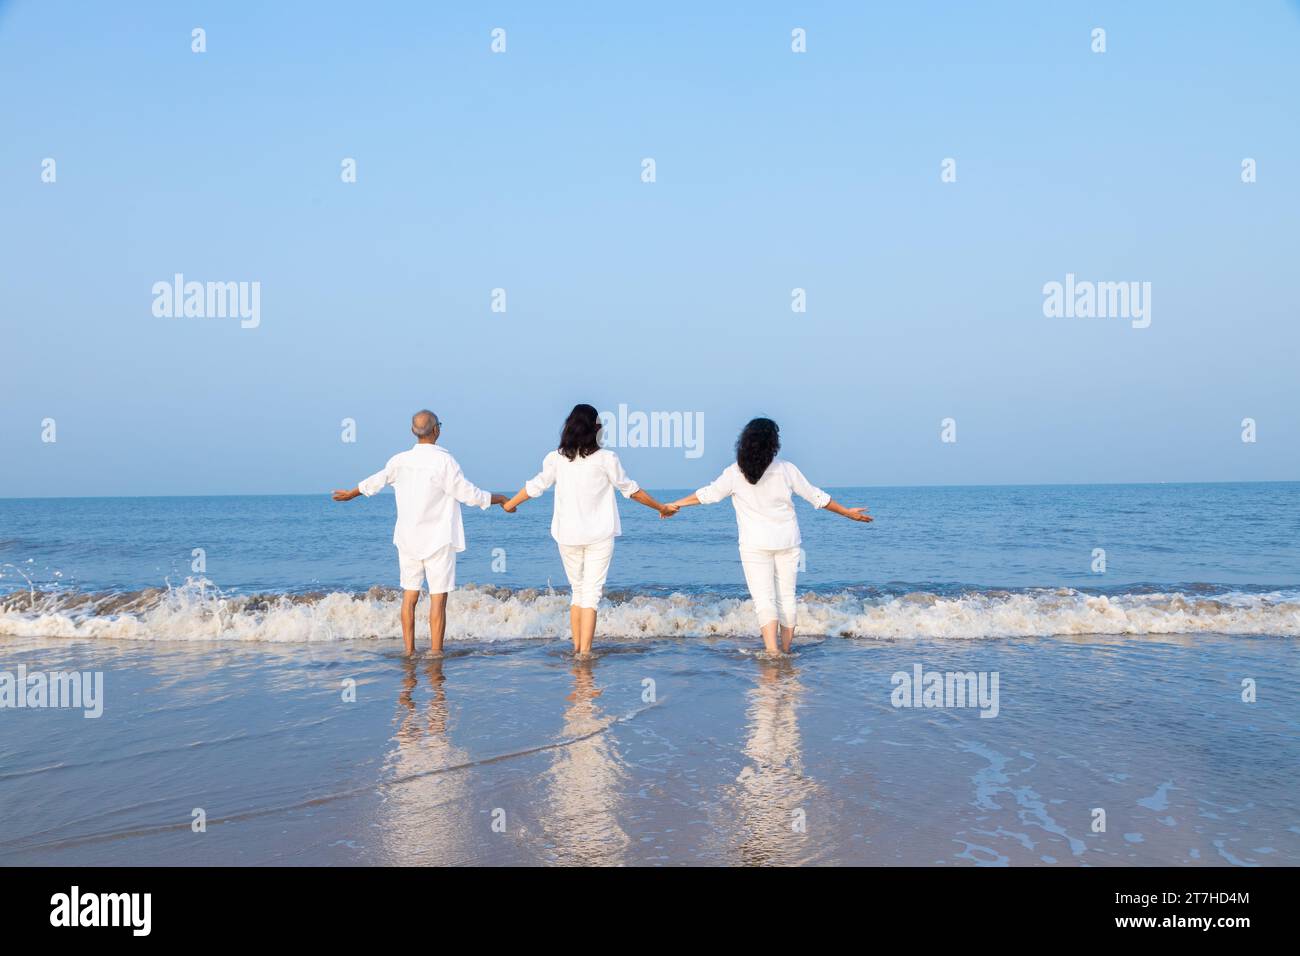 Happy senior indian couple with beautiful young daughter posing and enjoying vacation at beach. Family wearing white cloths having fun together. Stock Photo